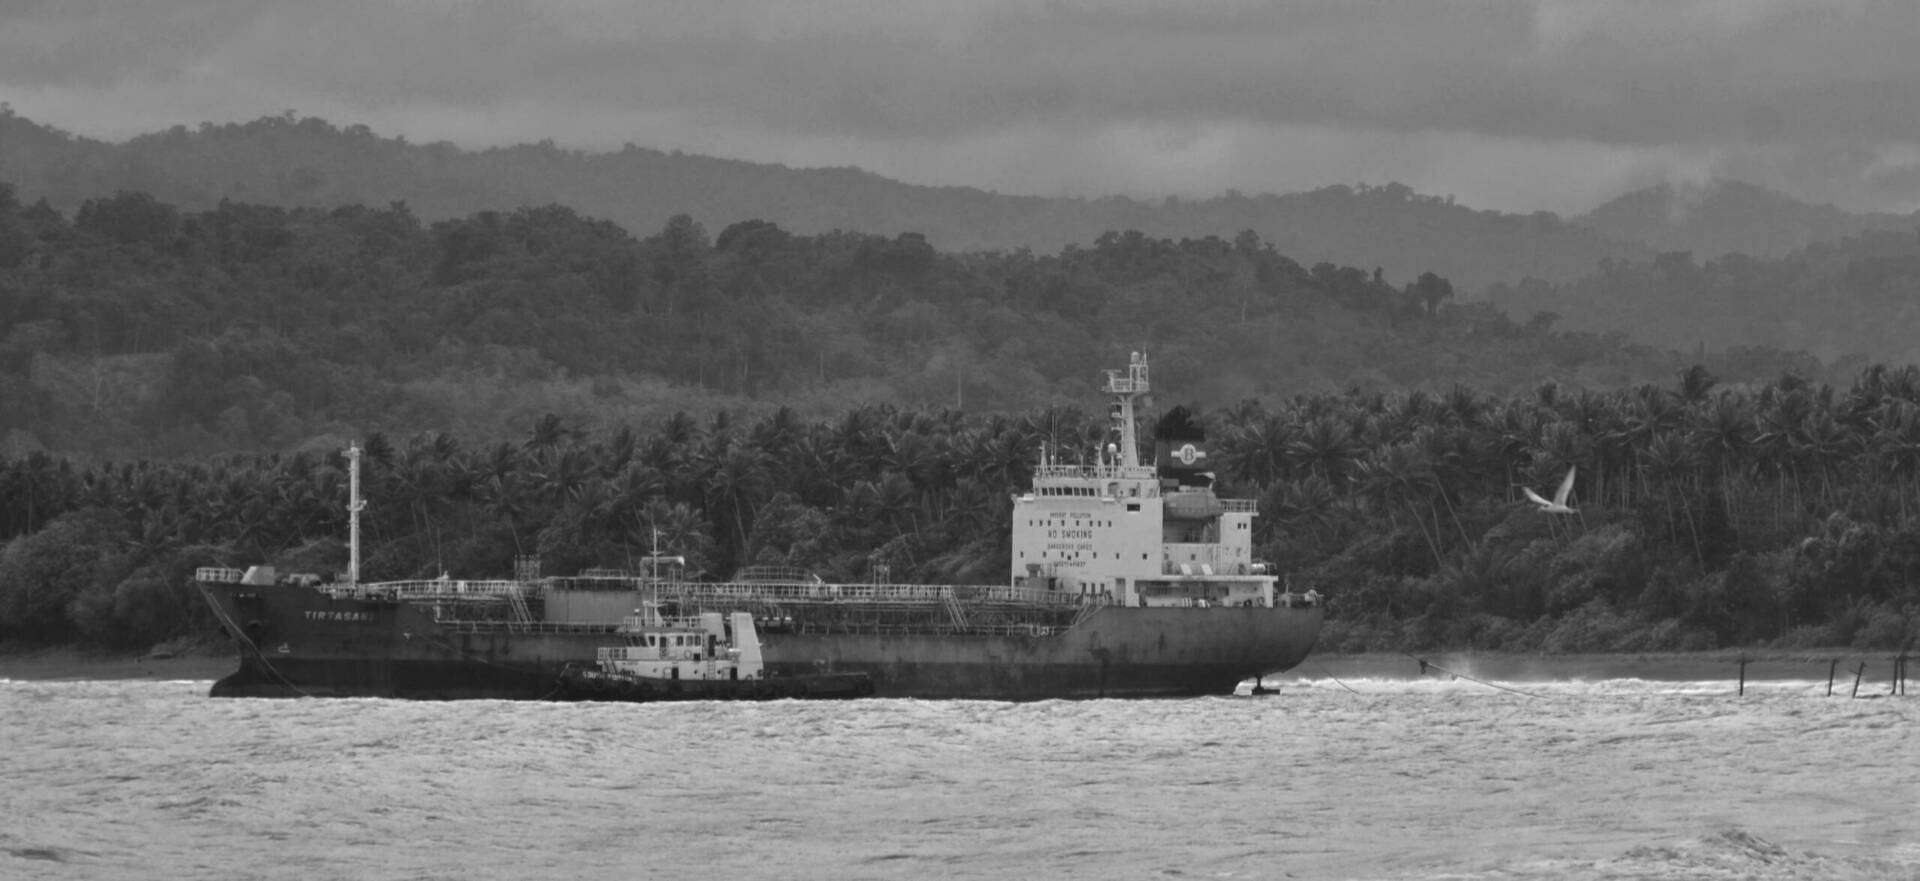 Black and white photograph of tanker ship anchored. In the background coconut plantings and forested hills. A white seabird flies past.